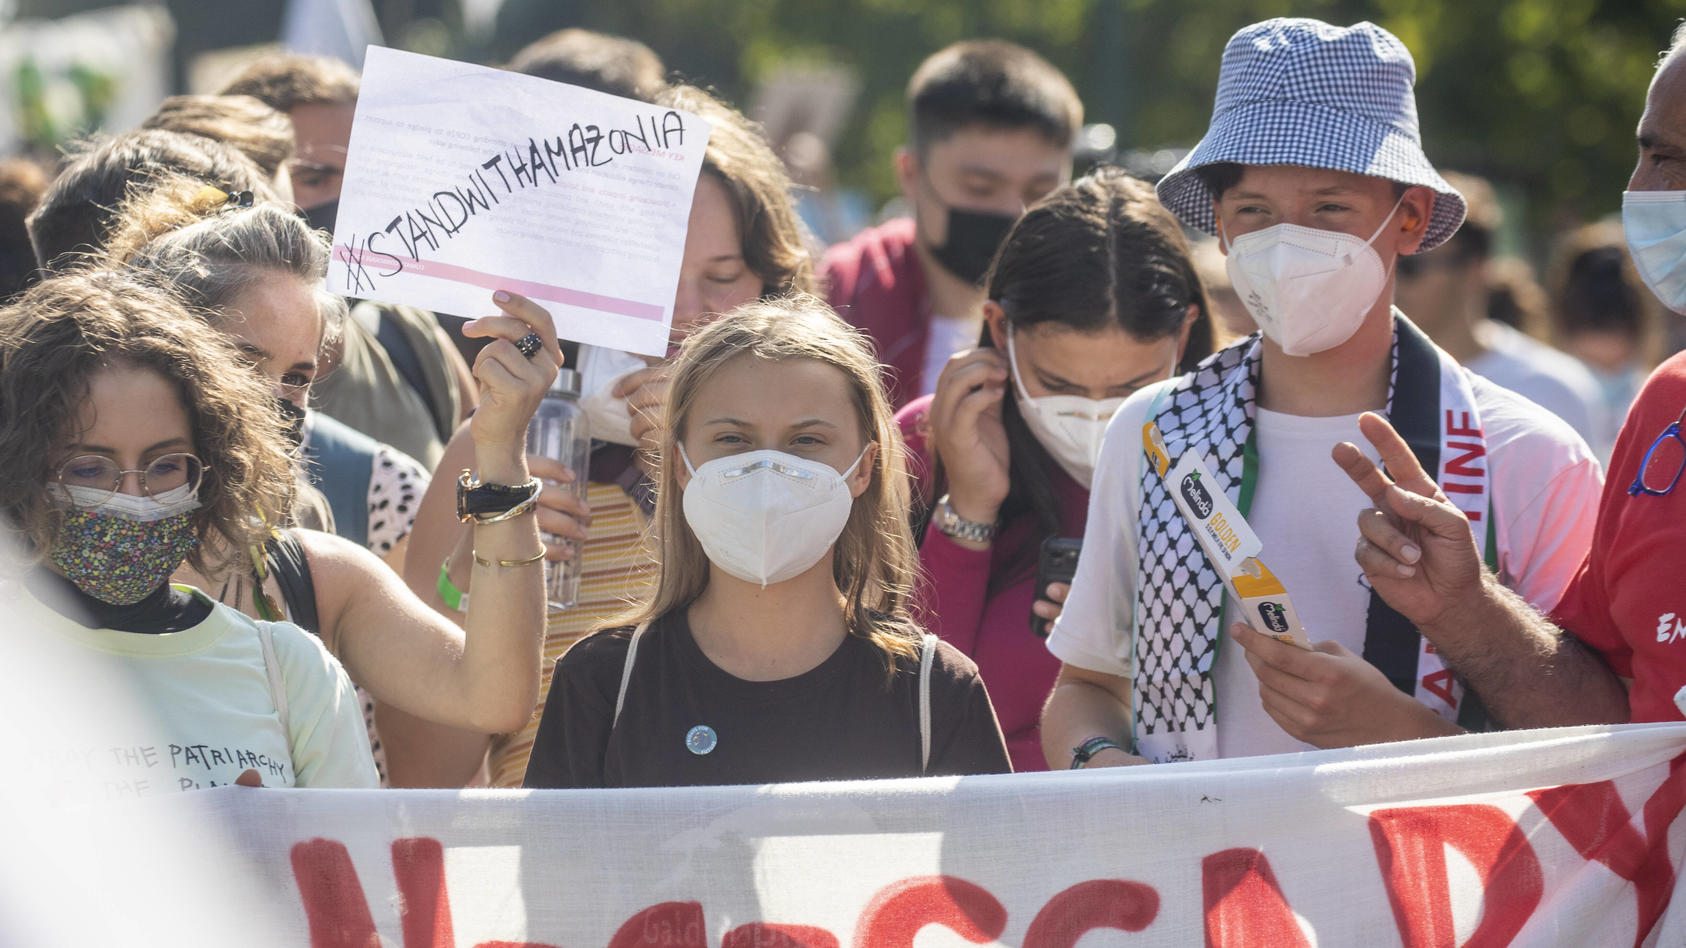  Friday For Future 2021 In Milan The Swedish climate activist Greta Thunberg partecipate to Fridays for Future Student strike held in Milan, Italy, on October 1, 2021. The event took place during the Pre-COP Event in Milan where thematic working grou